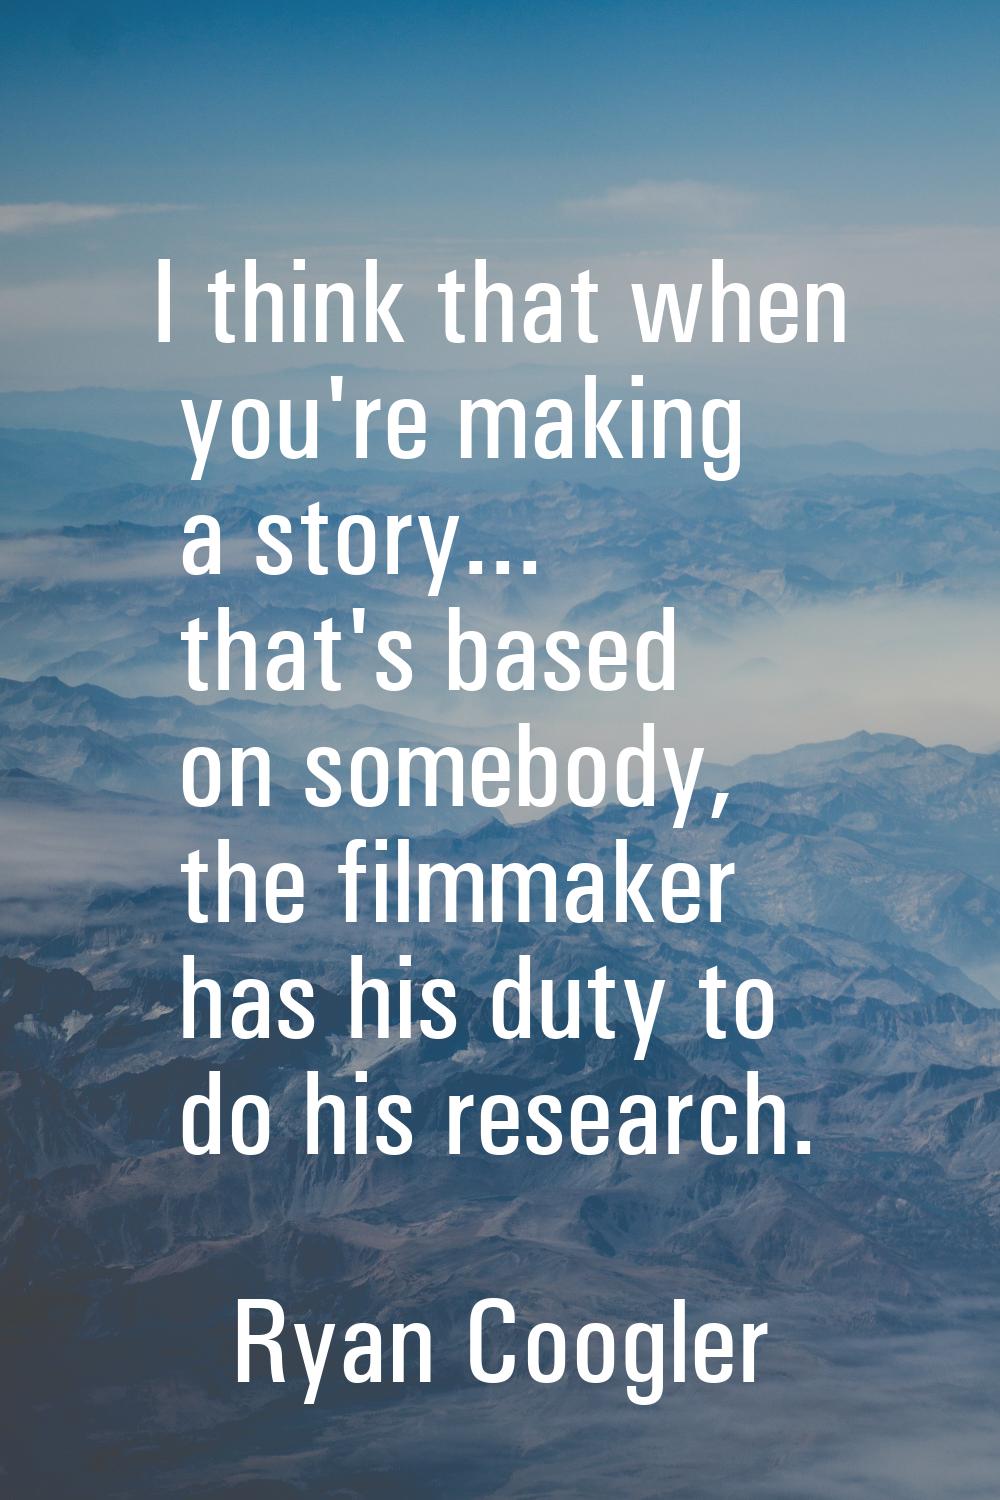 I think that when you're making a story... that's based on somebody, the filmmaker has his duty to 